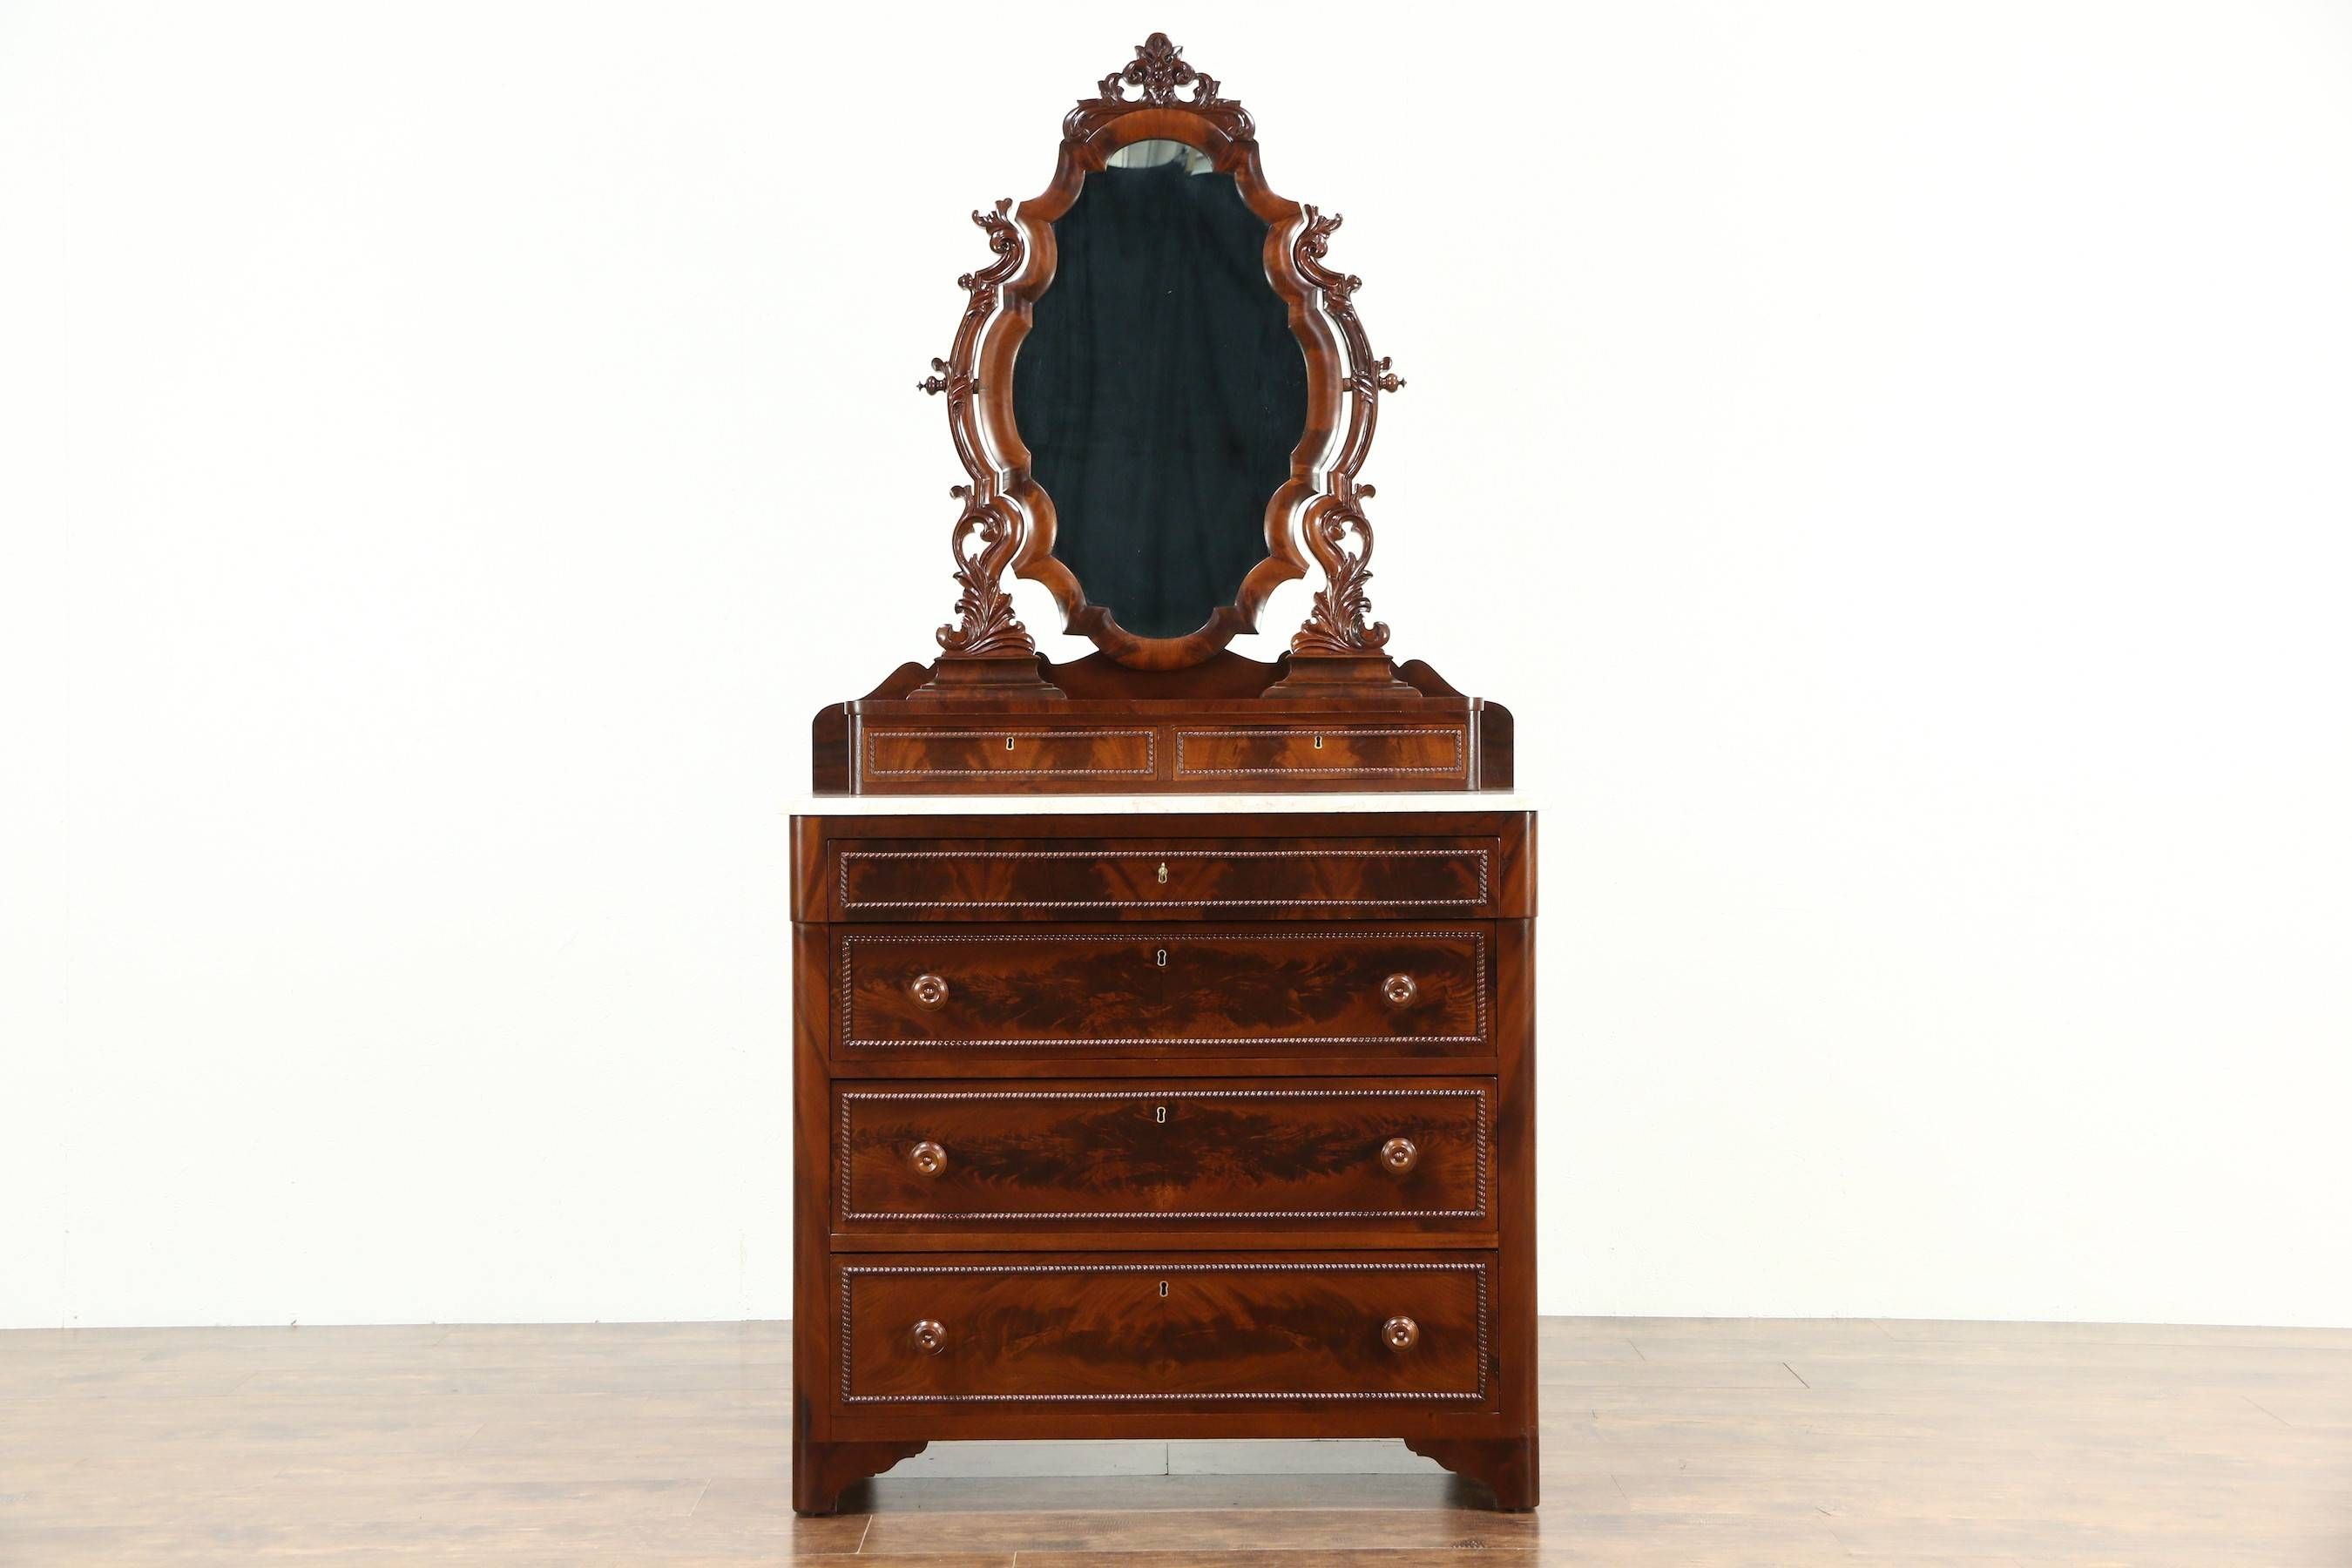 Victorian 1850's Antique Chest Or Dresser, Carved Mahogany, Mirror Regarding Antique Victorian Mirrors (View 11 of 15)